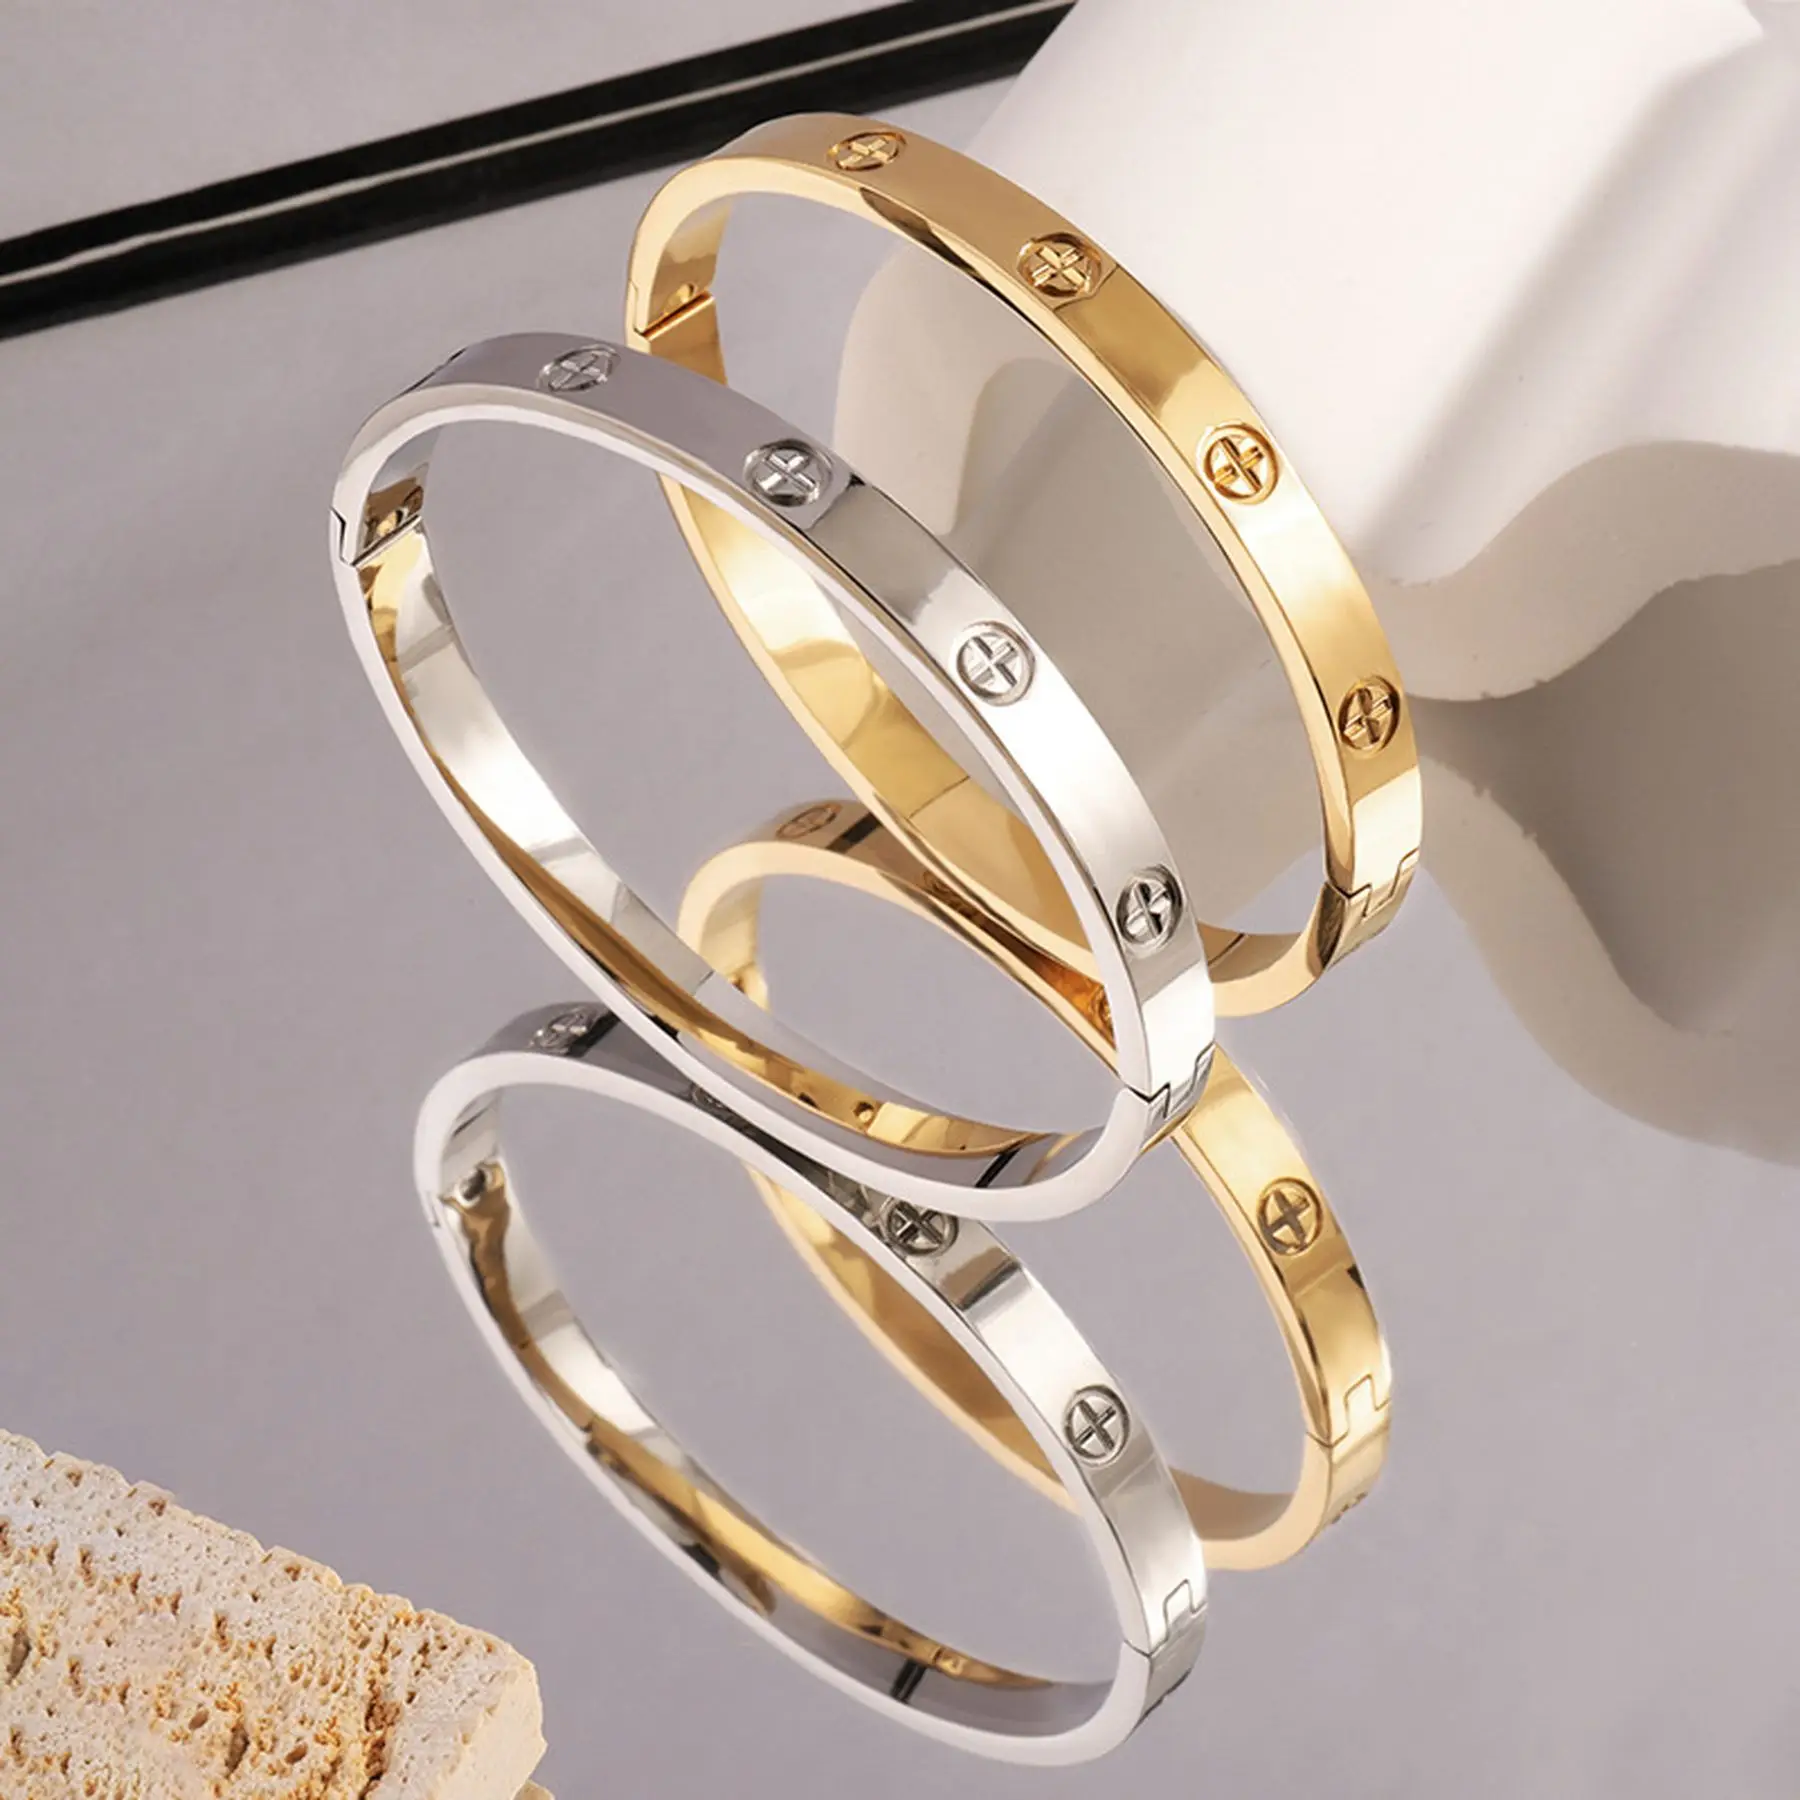 European and American stainless steel cross pattern bracelet, grand and luxurious, trendy and personalized design, simple and no